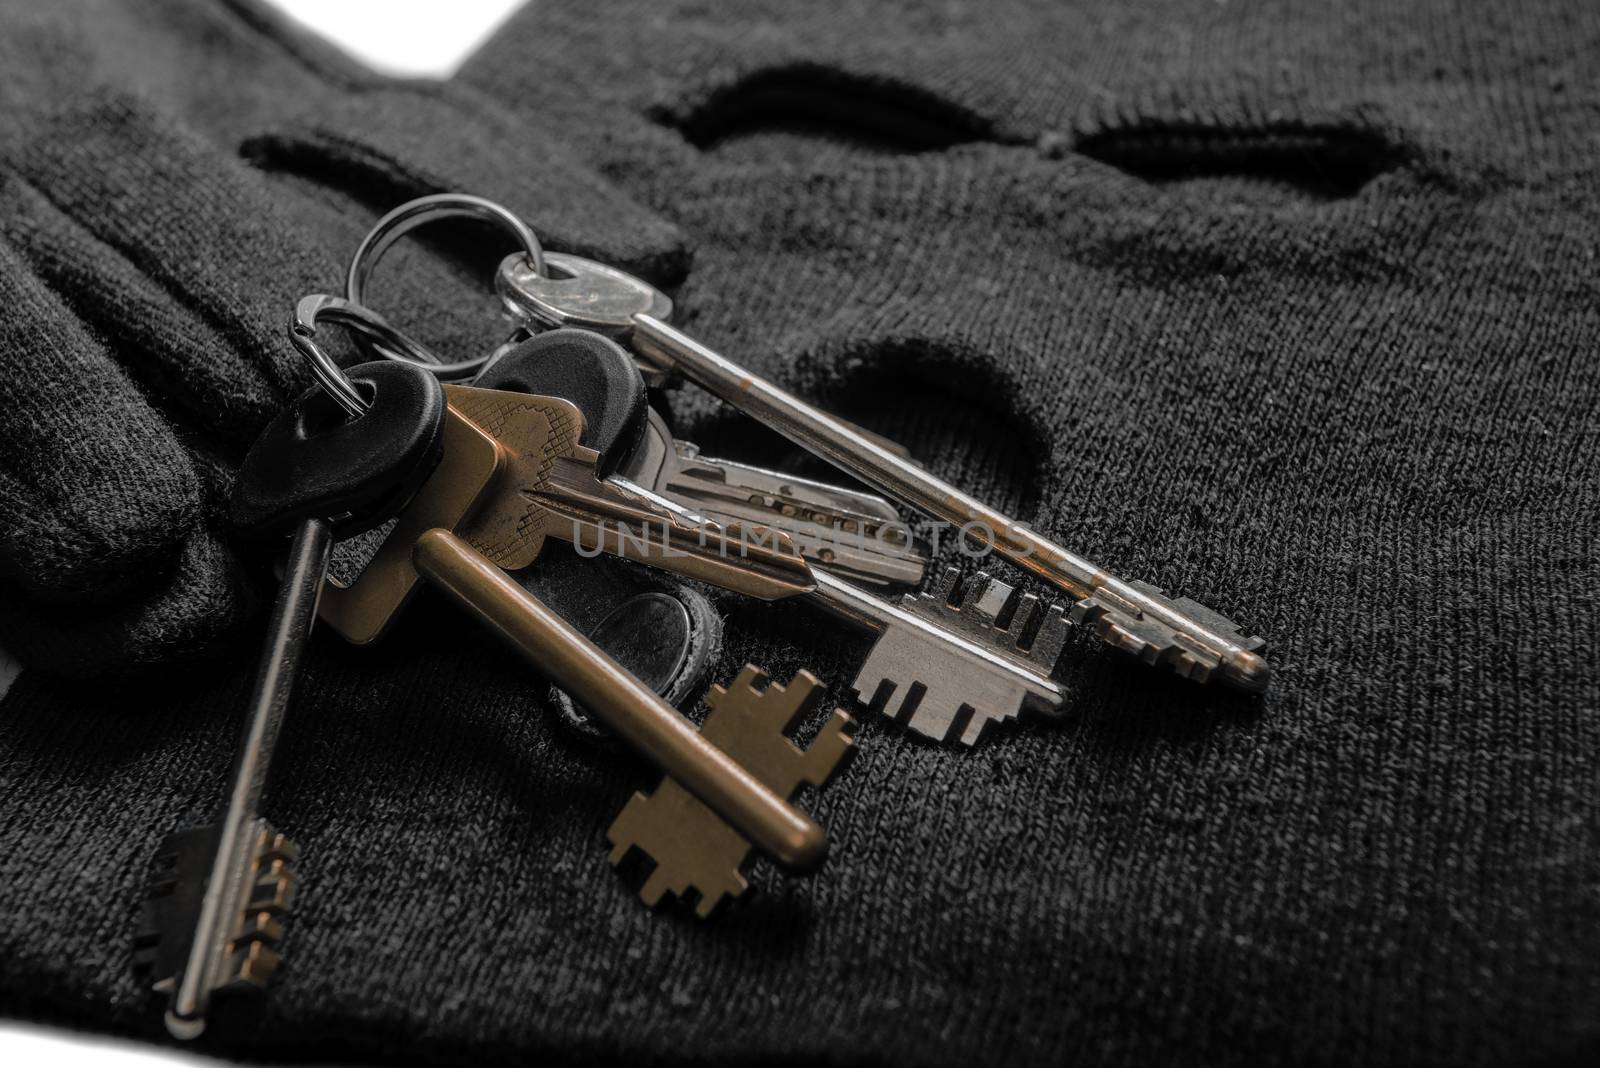 keys of the robber for opening locks, balaclava and gloves close-up